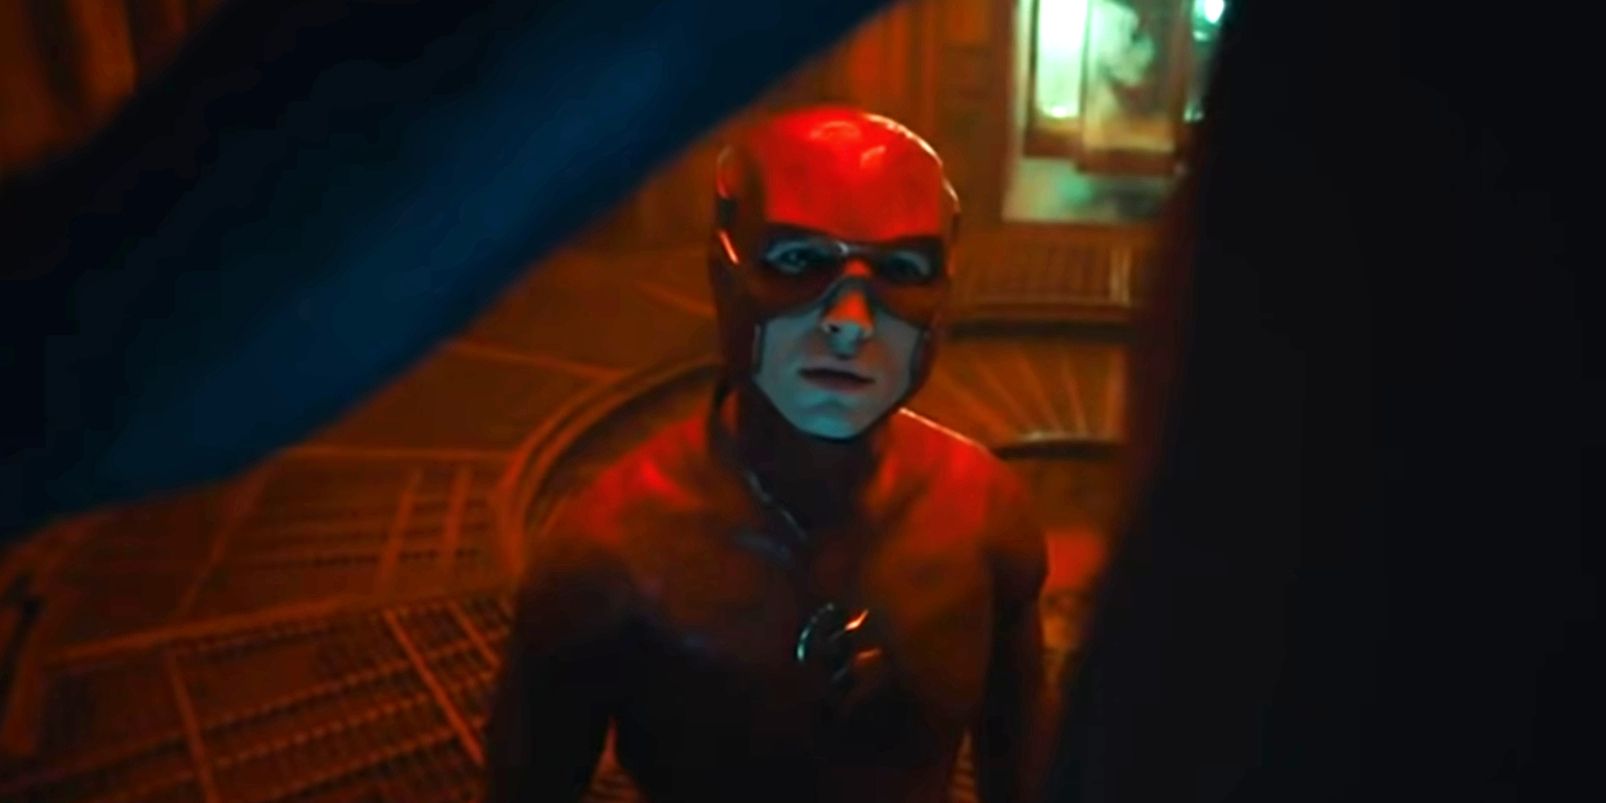 The Flash Movie Test Screening Reactions Reportedly Very Positive